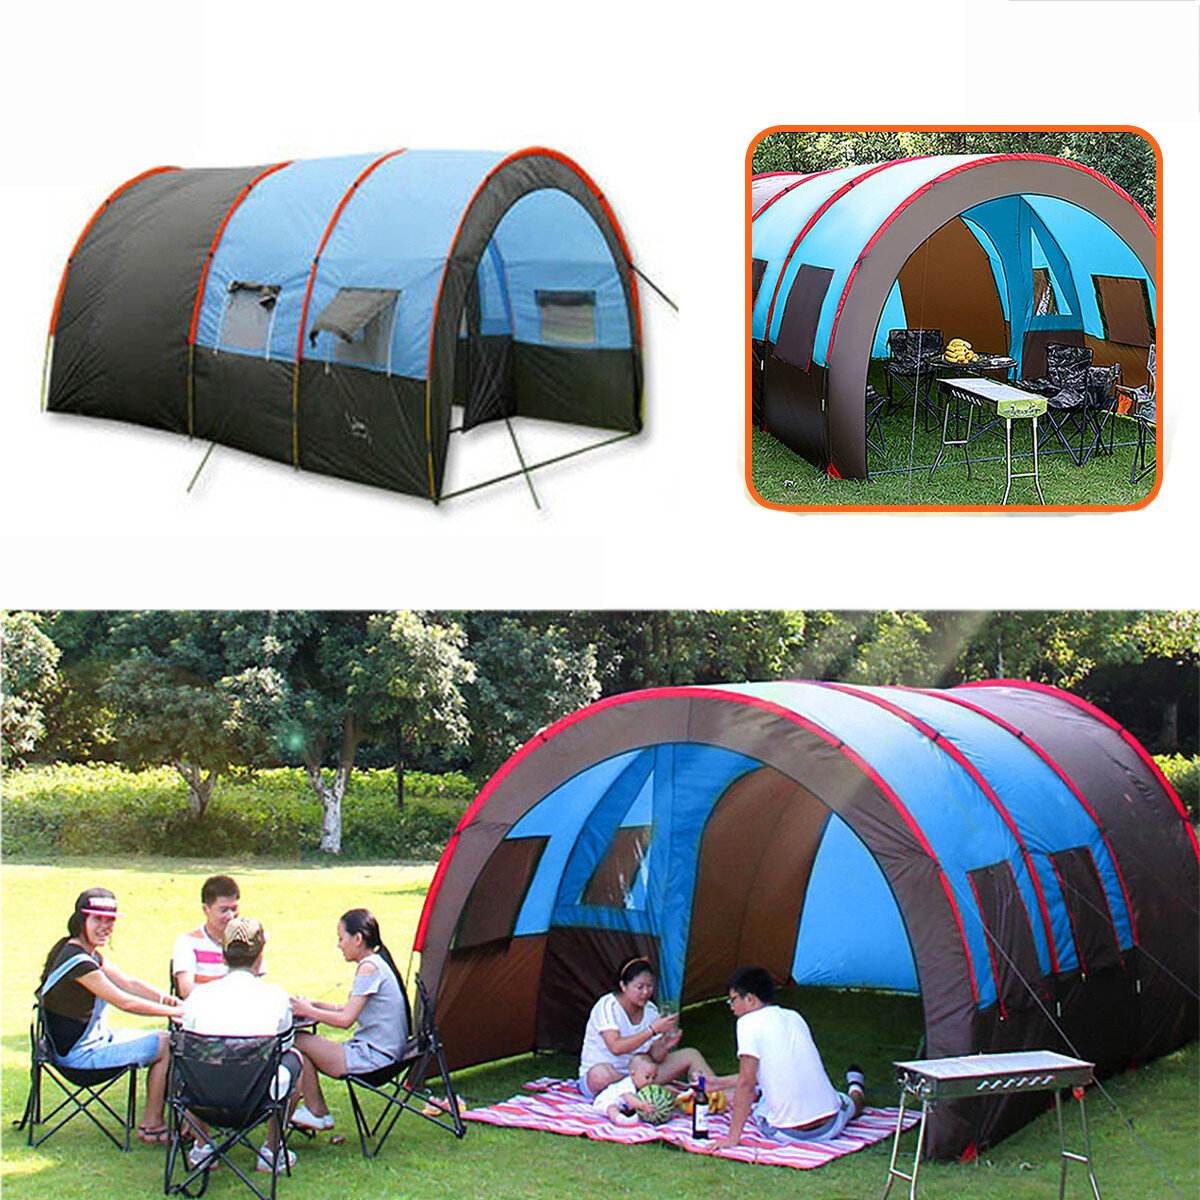 8-10 People Large Capacity Camping Tent Waterproof Portable Travel Hiking Double Layer Outdoor Tent